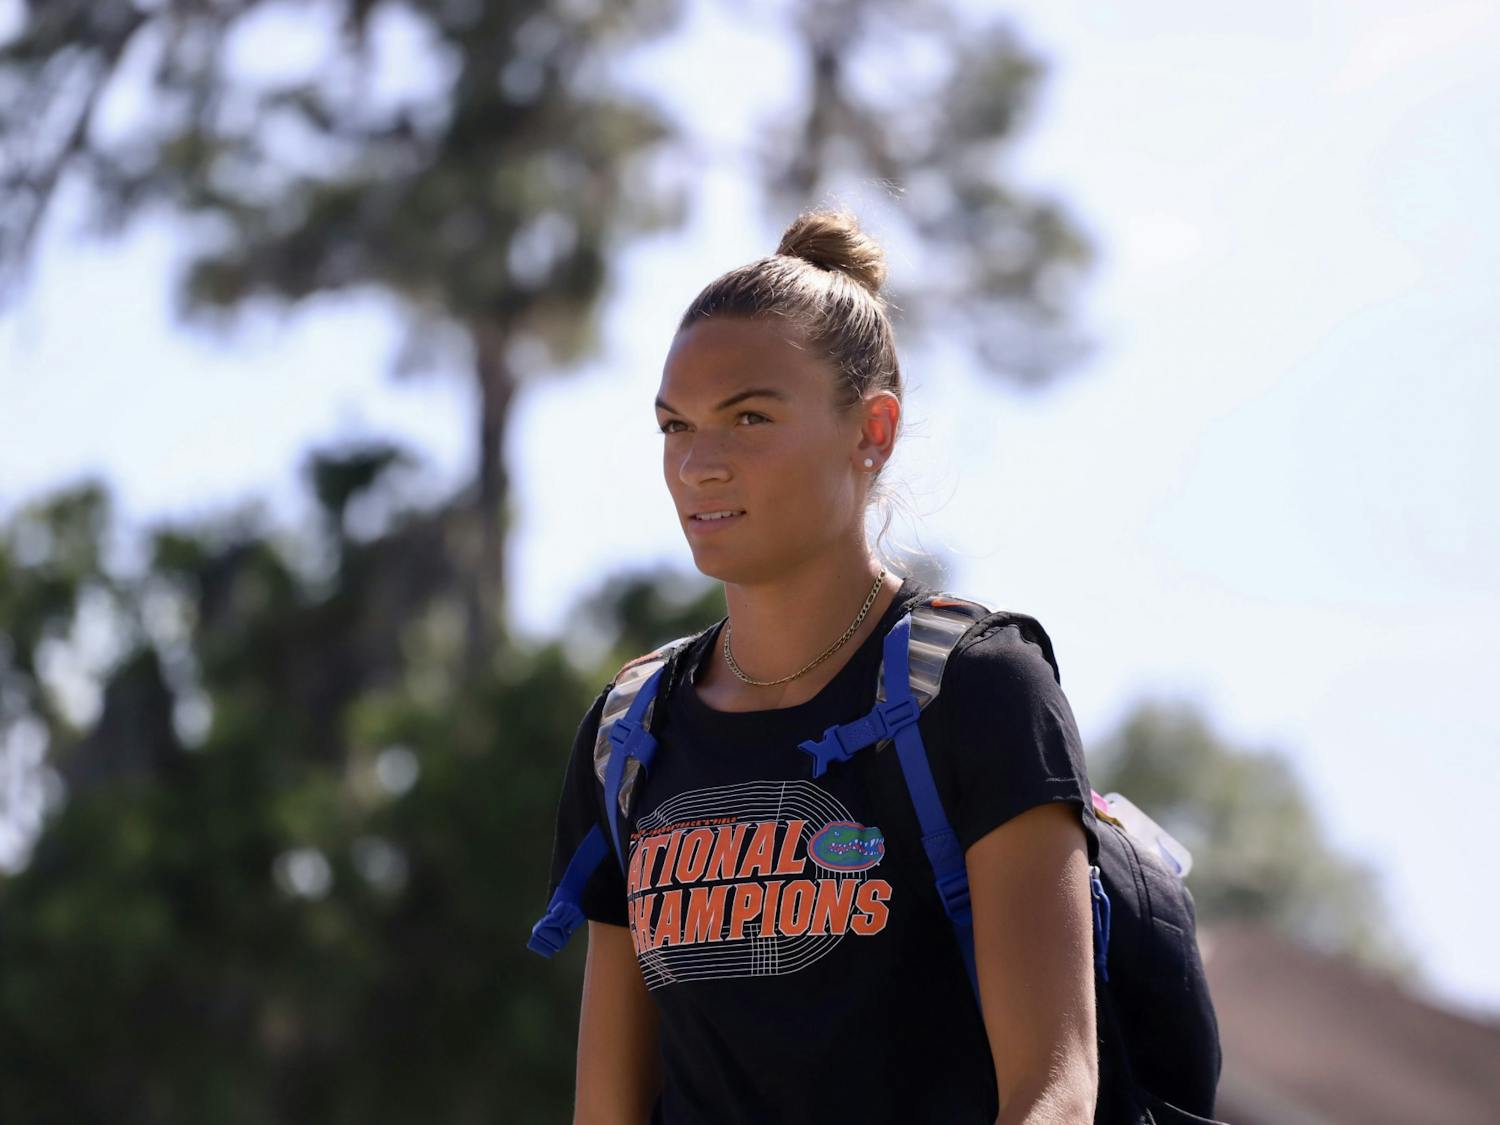 Florida Heptathlete Anna Hall qualified for Team USA on Saturday with her performance at the USATF Combined Championships.